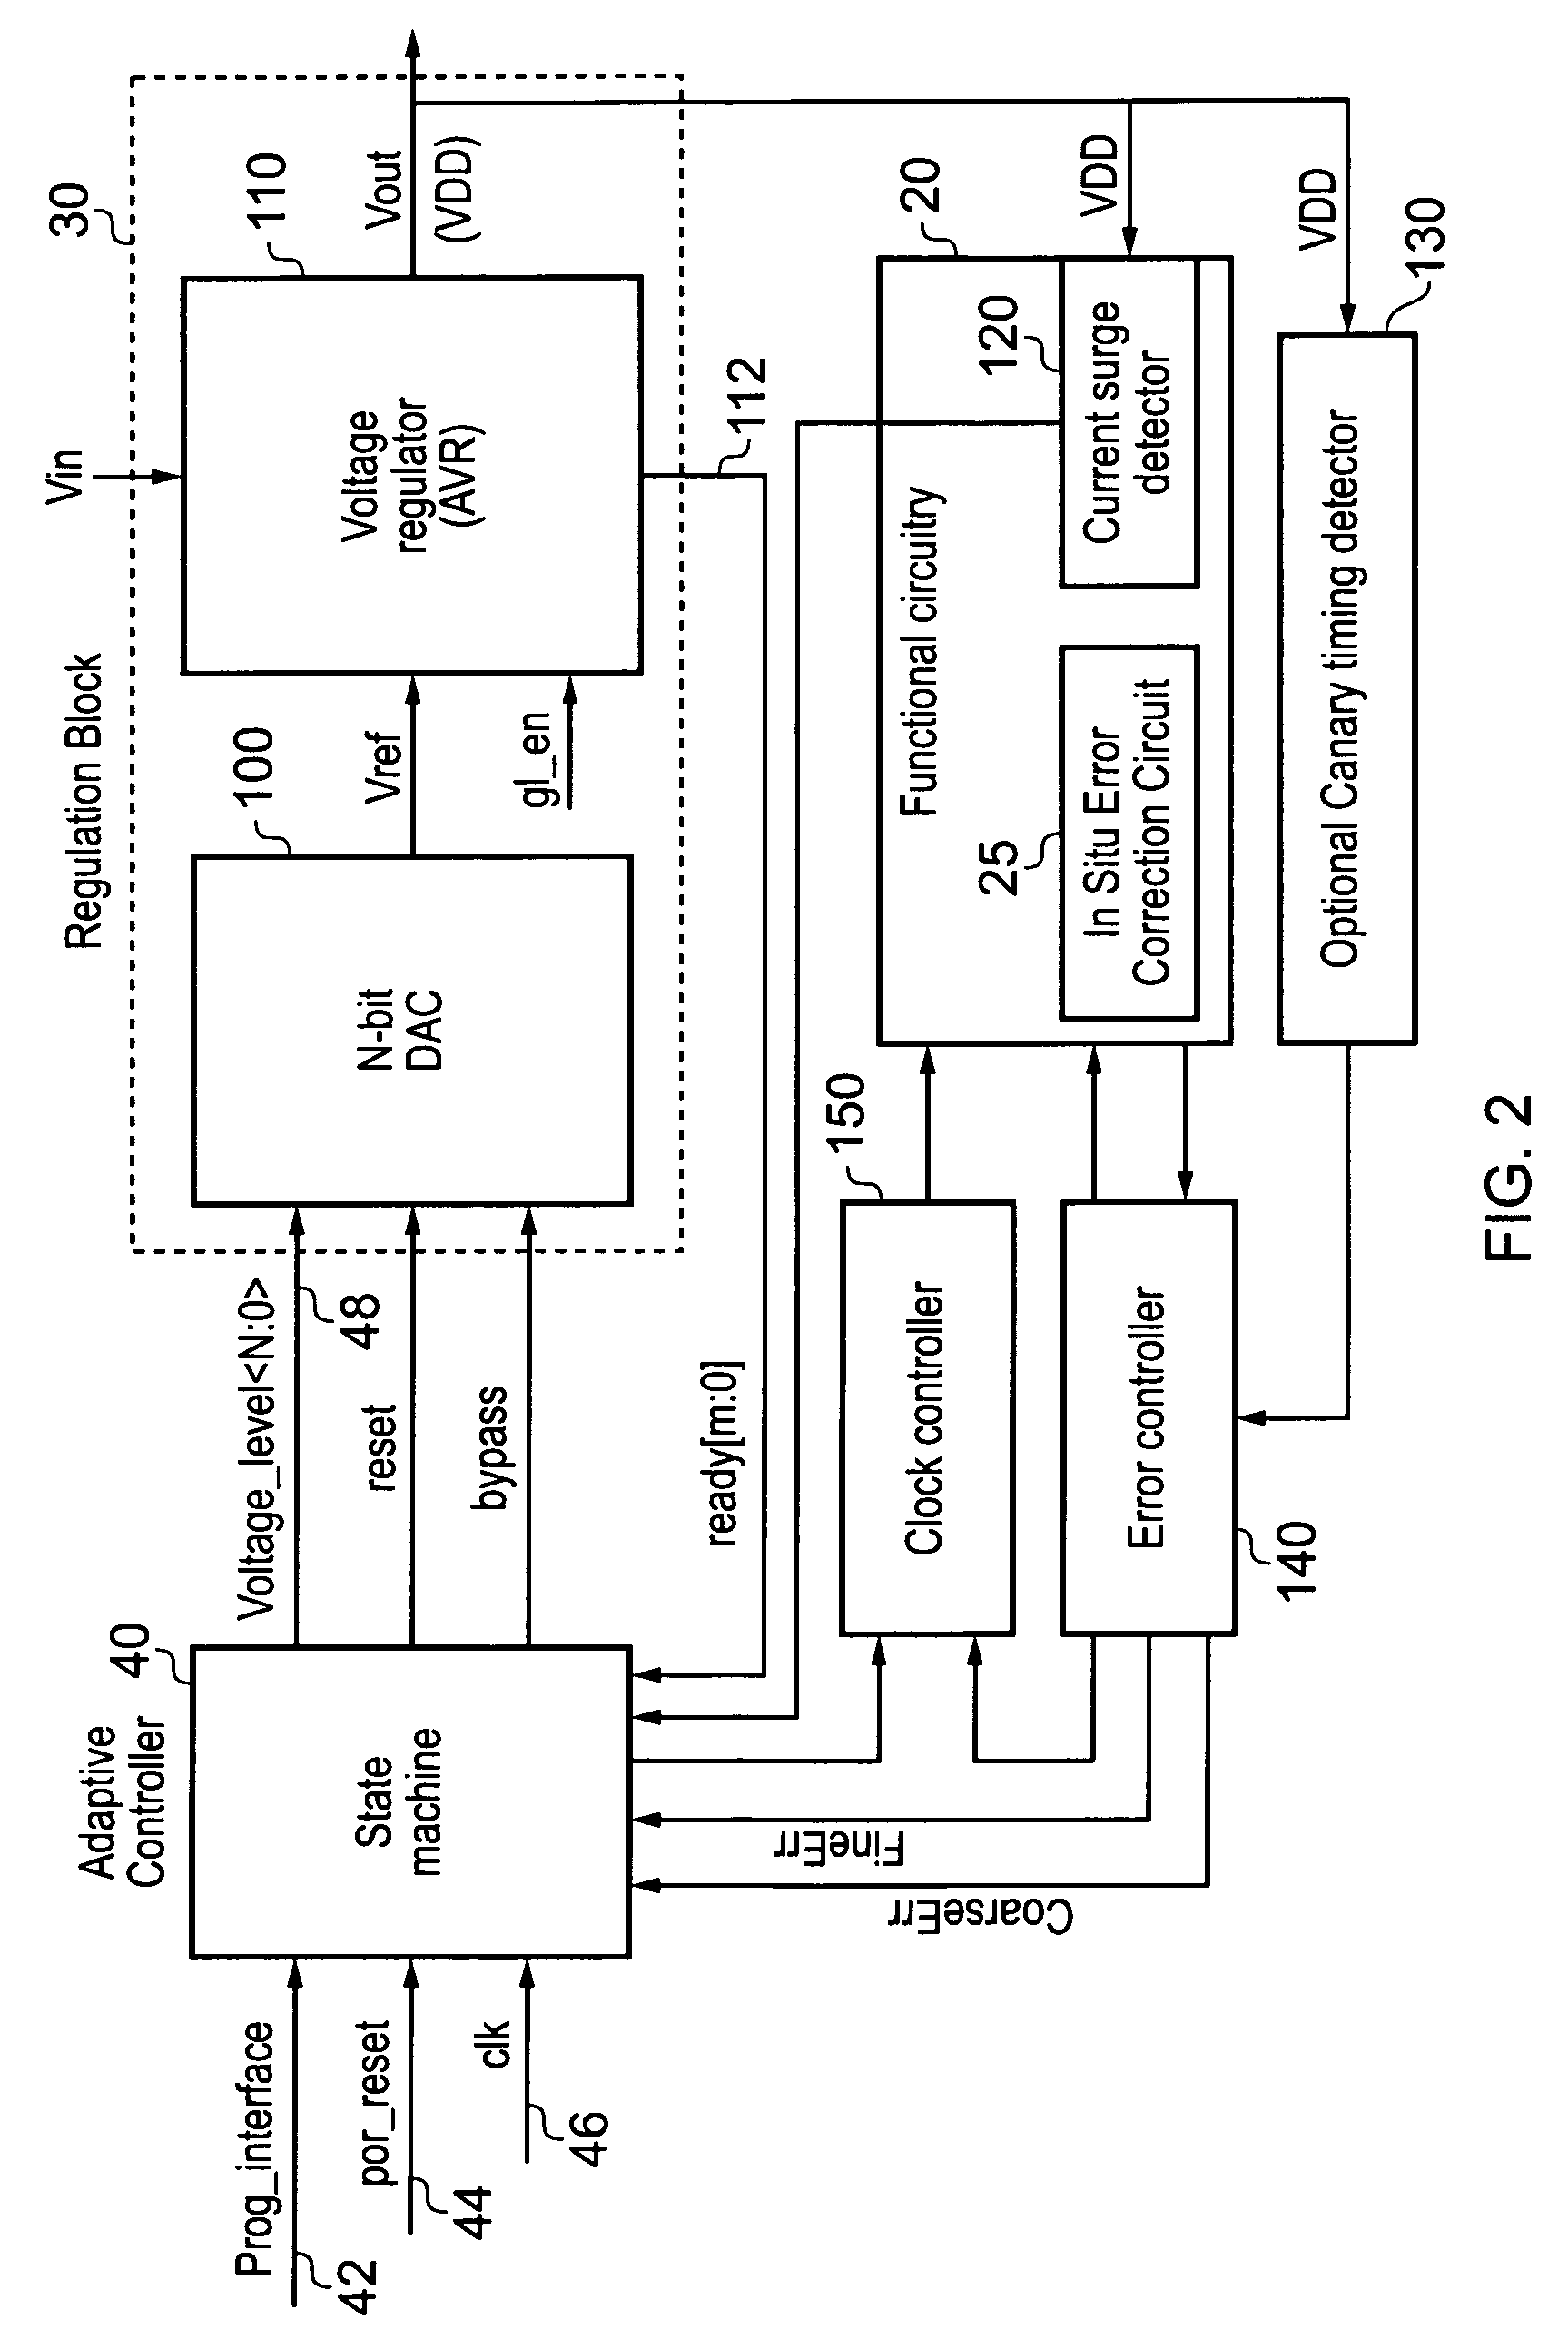 Data processing system and method for regulating a voltage supply to functional circuitry of the data processing system